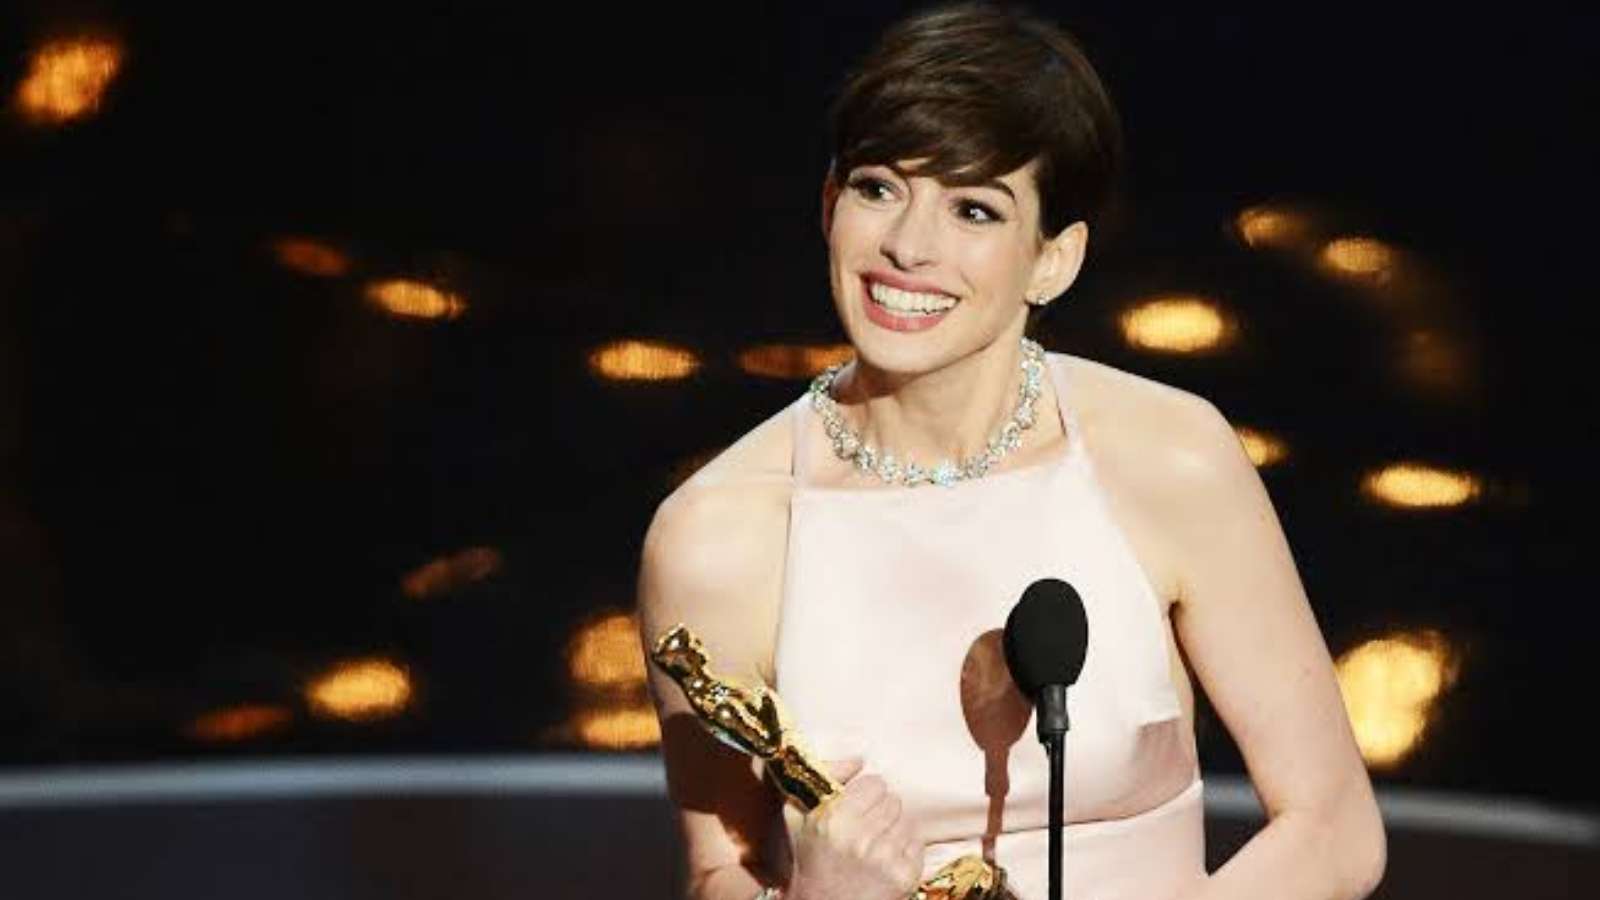 Anne Hathaway during Oscars 2013